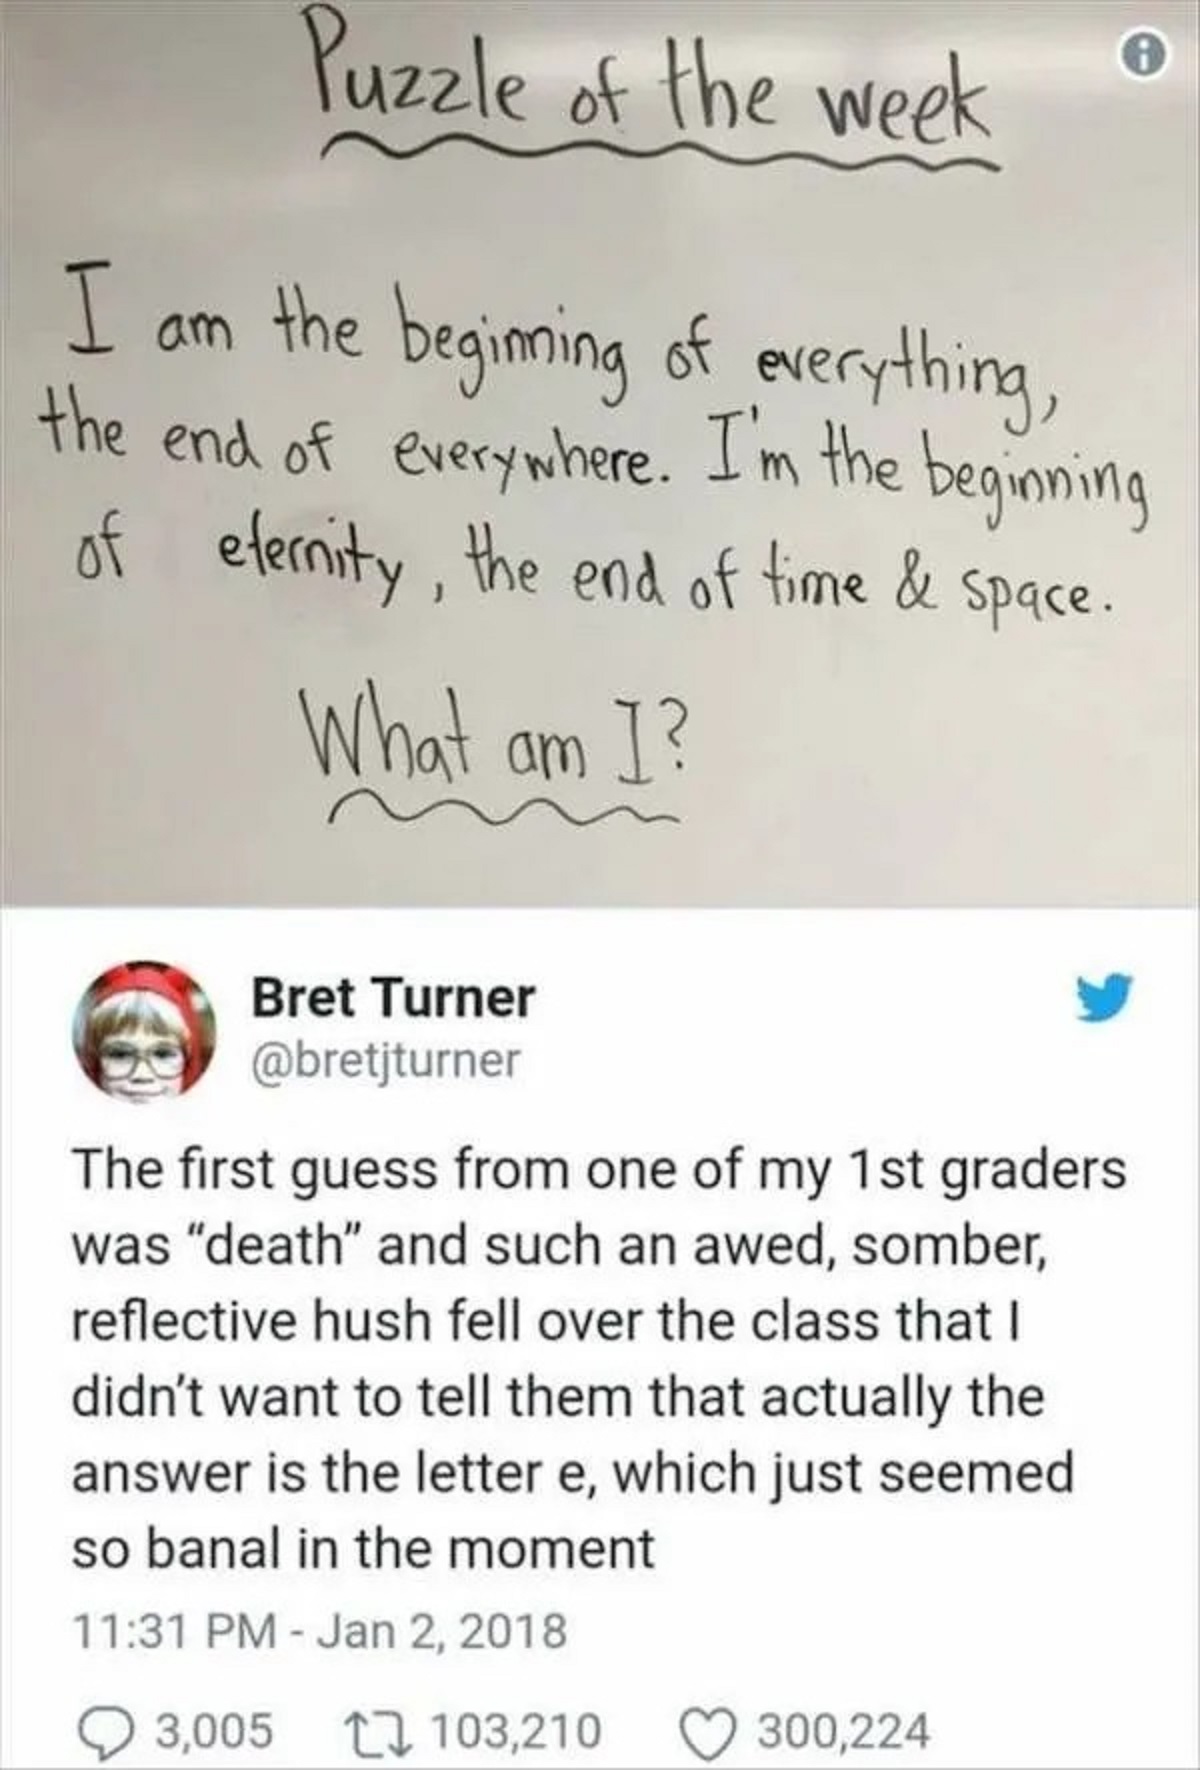 handwriting - I am Puzzle of the week the beginning of everything, the end of everywhere. I'm the beginning of eternity, the end of time & space. What am I? Bret Turner The first guess from one of my 1st graders was "death" and such an awed, somber, refle